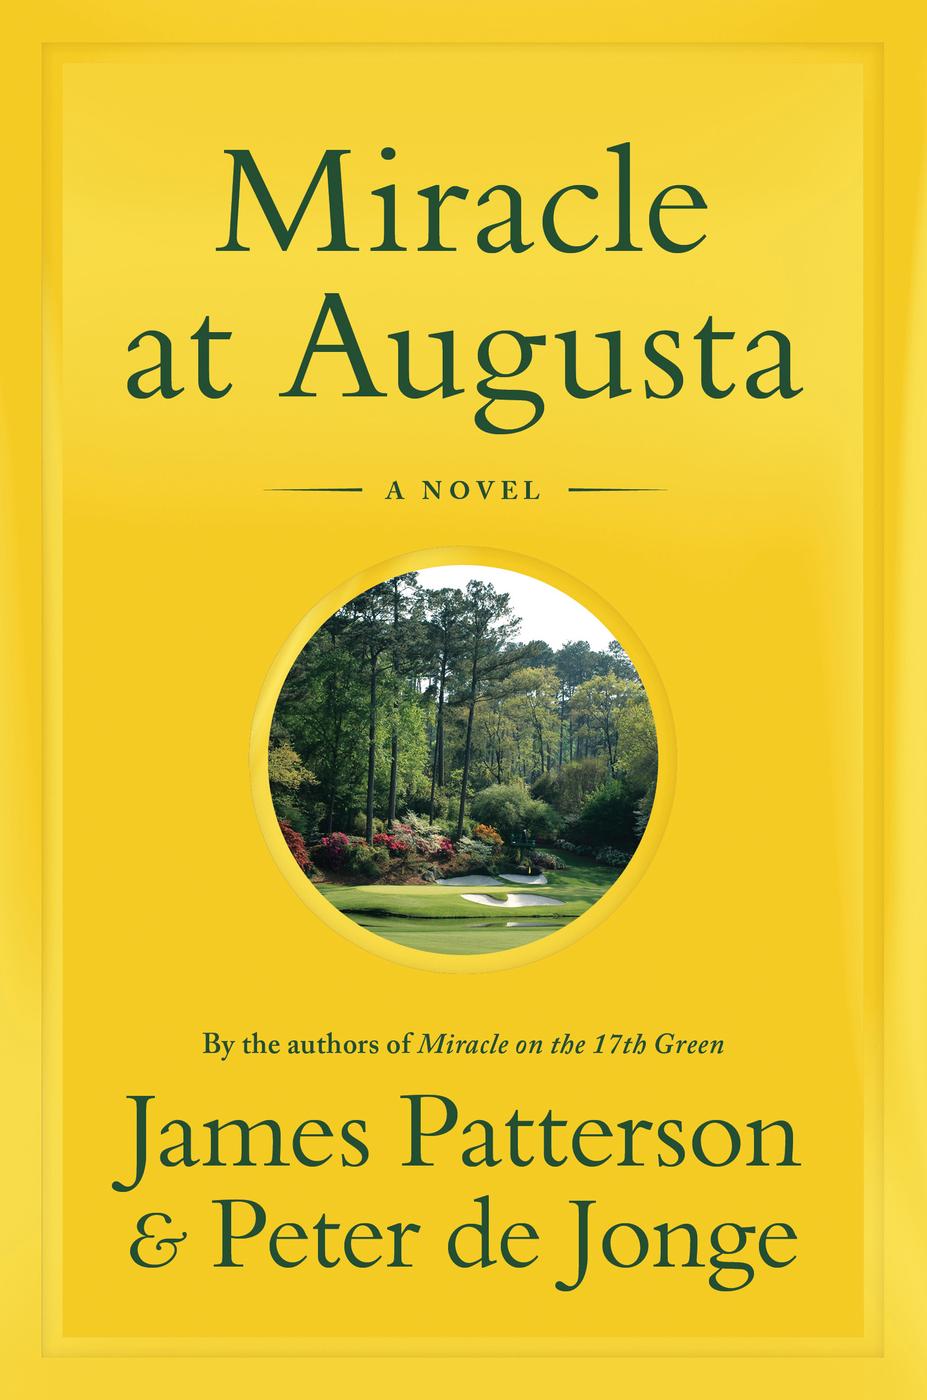 Miracle at Augusta (2015) by James Patterson